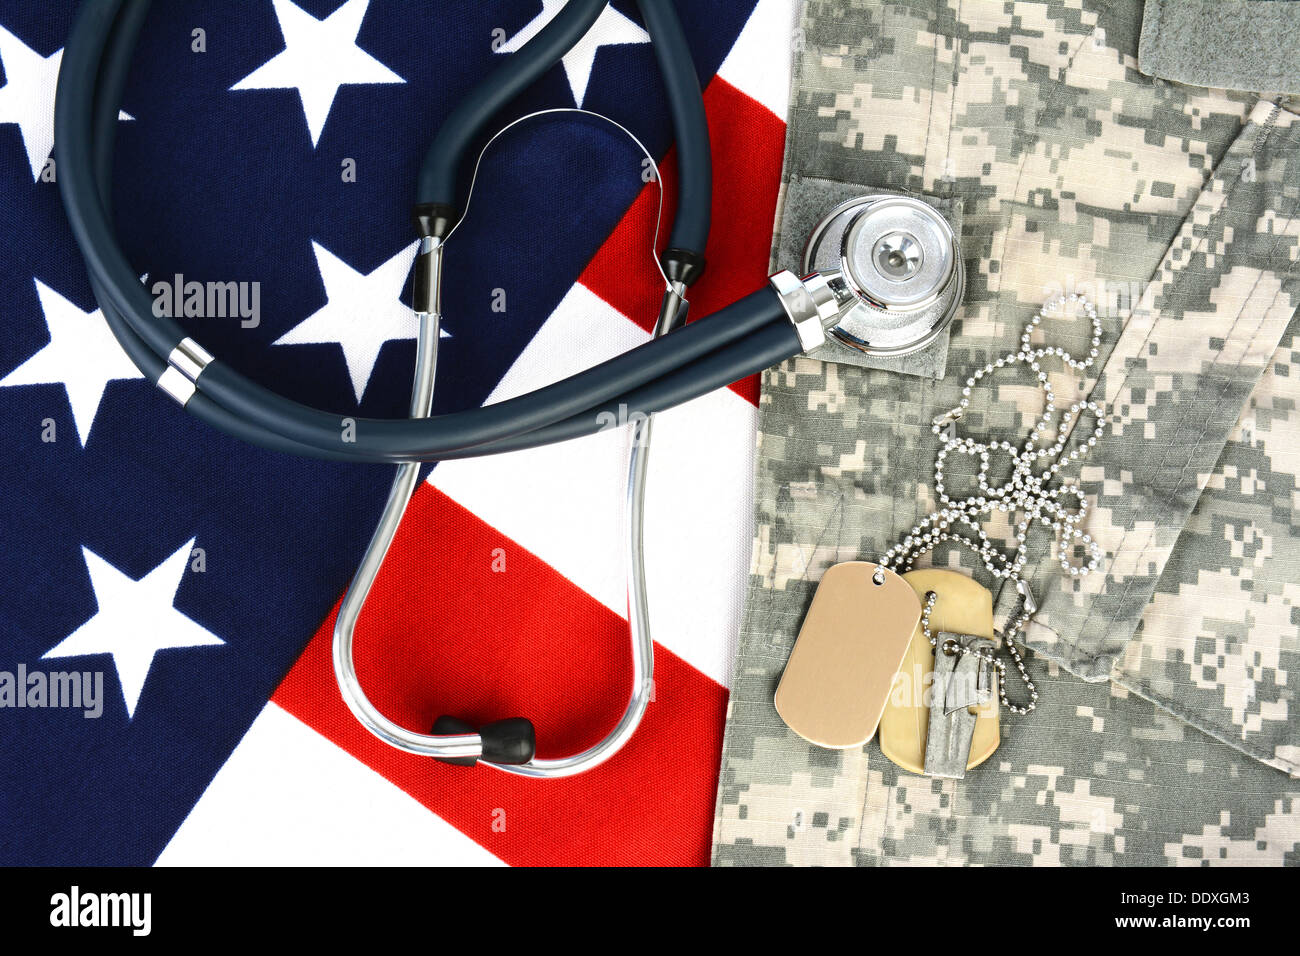 Military fatigues and dog tags on an American Flag with a stethoscope to illustrate health care in the armed services. Stock Photo